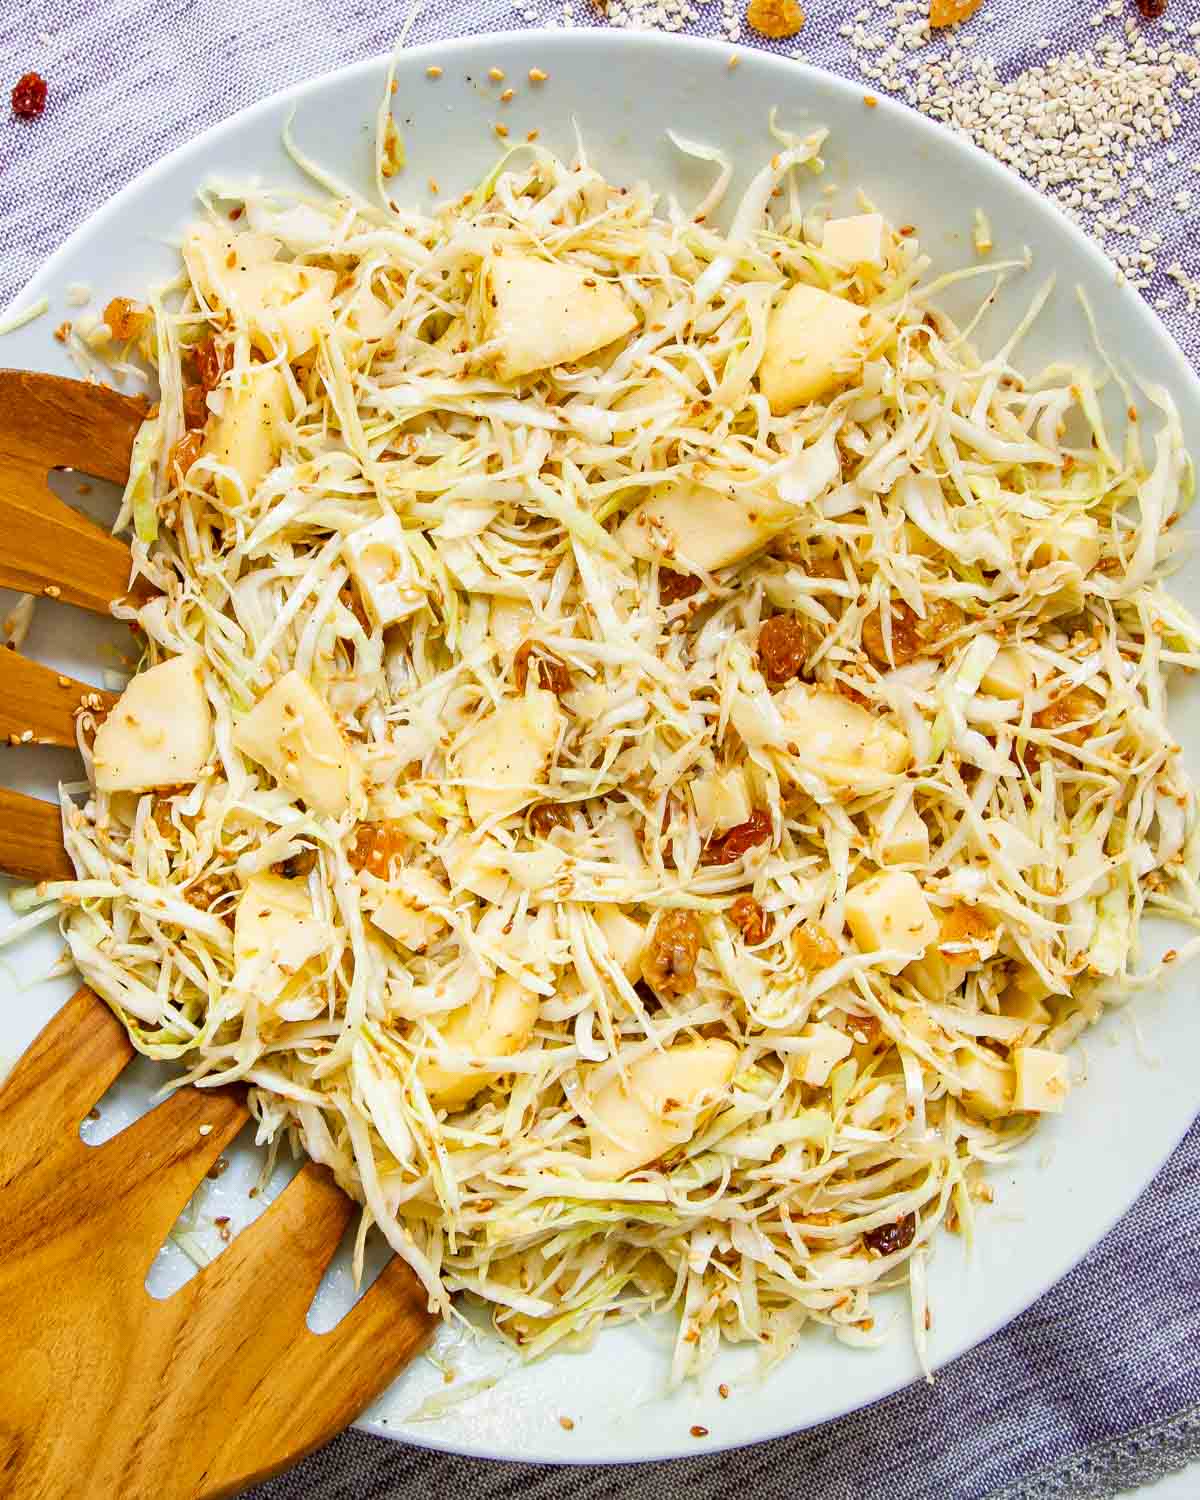 sesame cabbage salad in a large shallow white plate with 2 salad hands in it